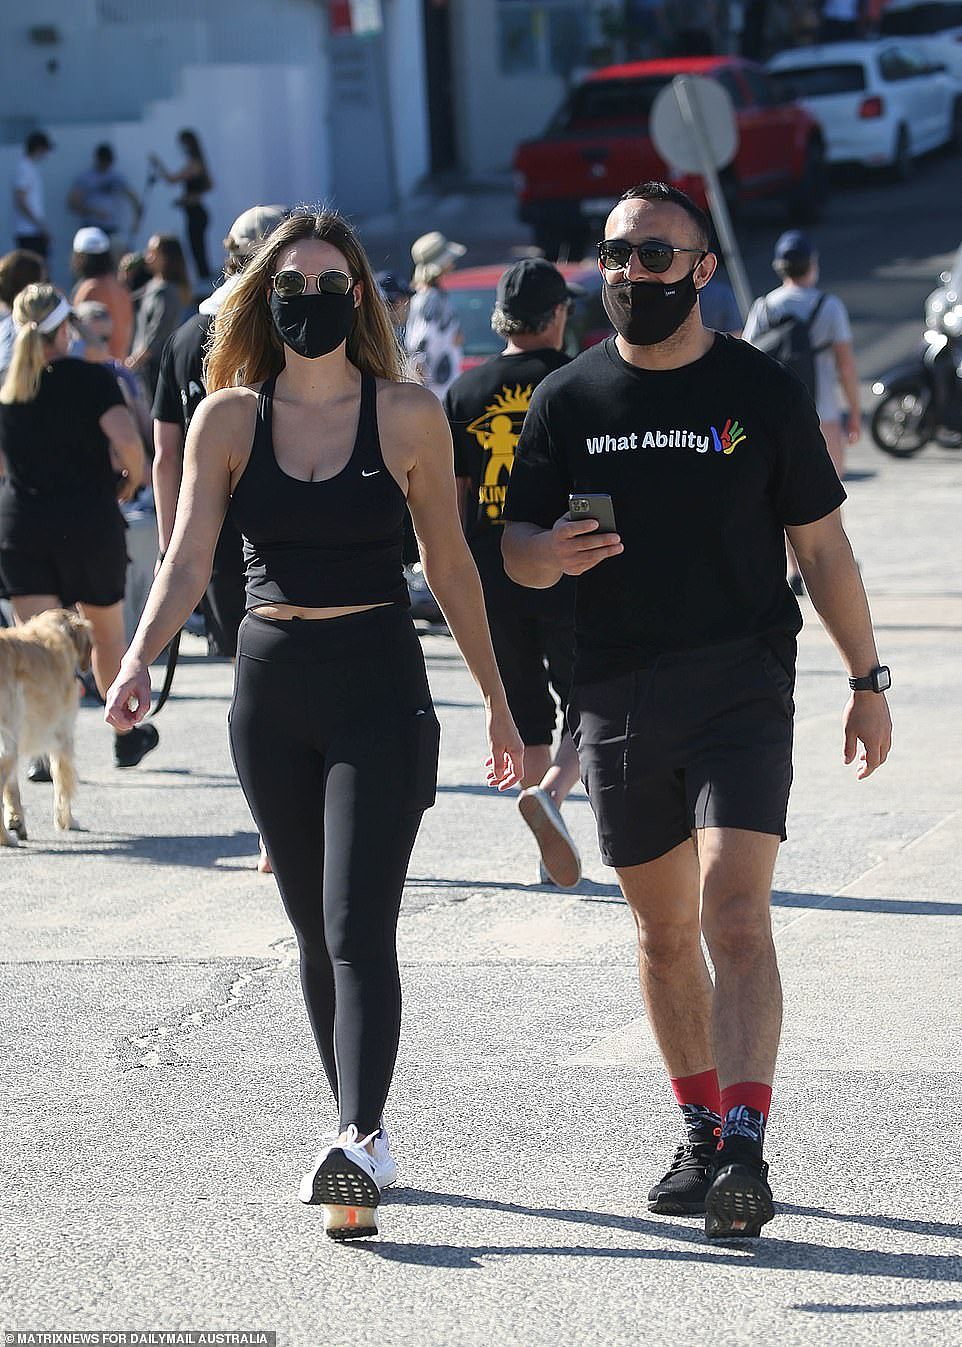 Two Sydney residents are seen walking along the promenade at Bondi Beach during a sweltering hot day on Saturday